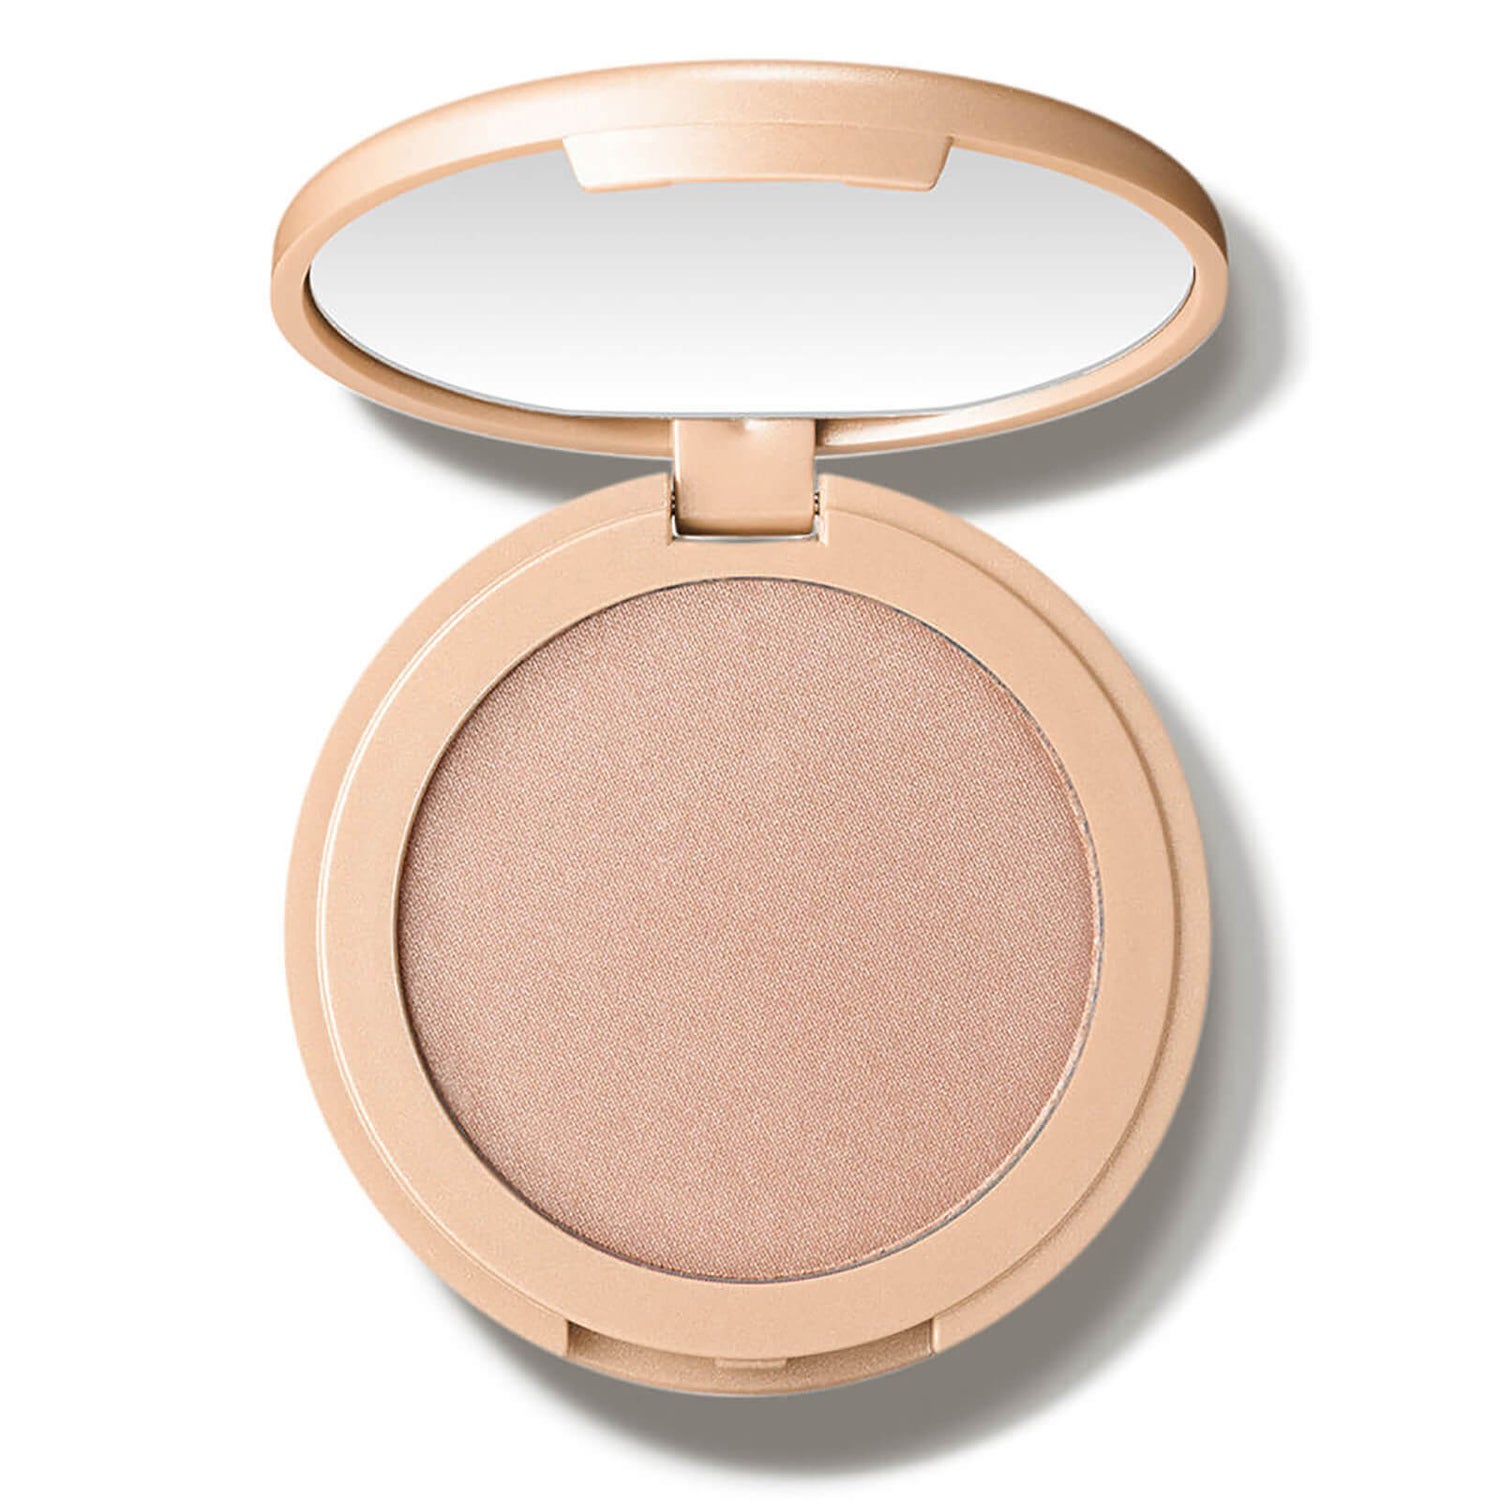 Tarte Amazonian Clay 12-Hour Highlighter - Exposed (0.2 oz.)